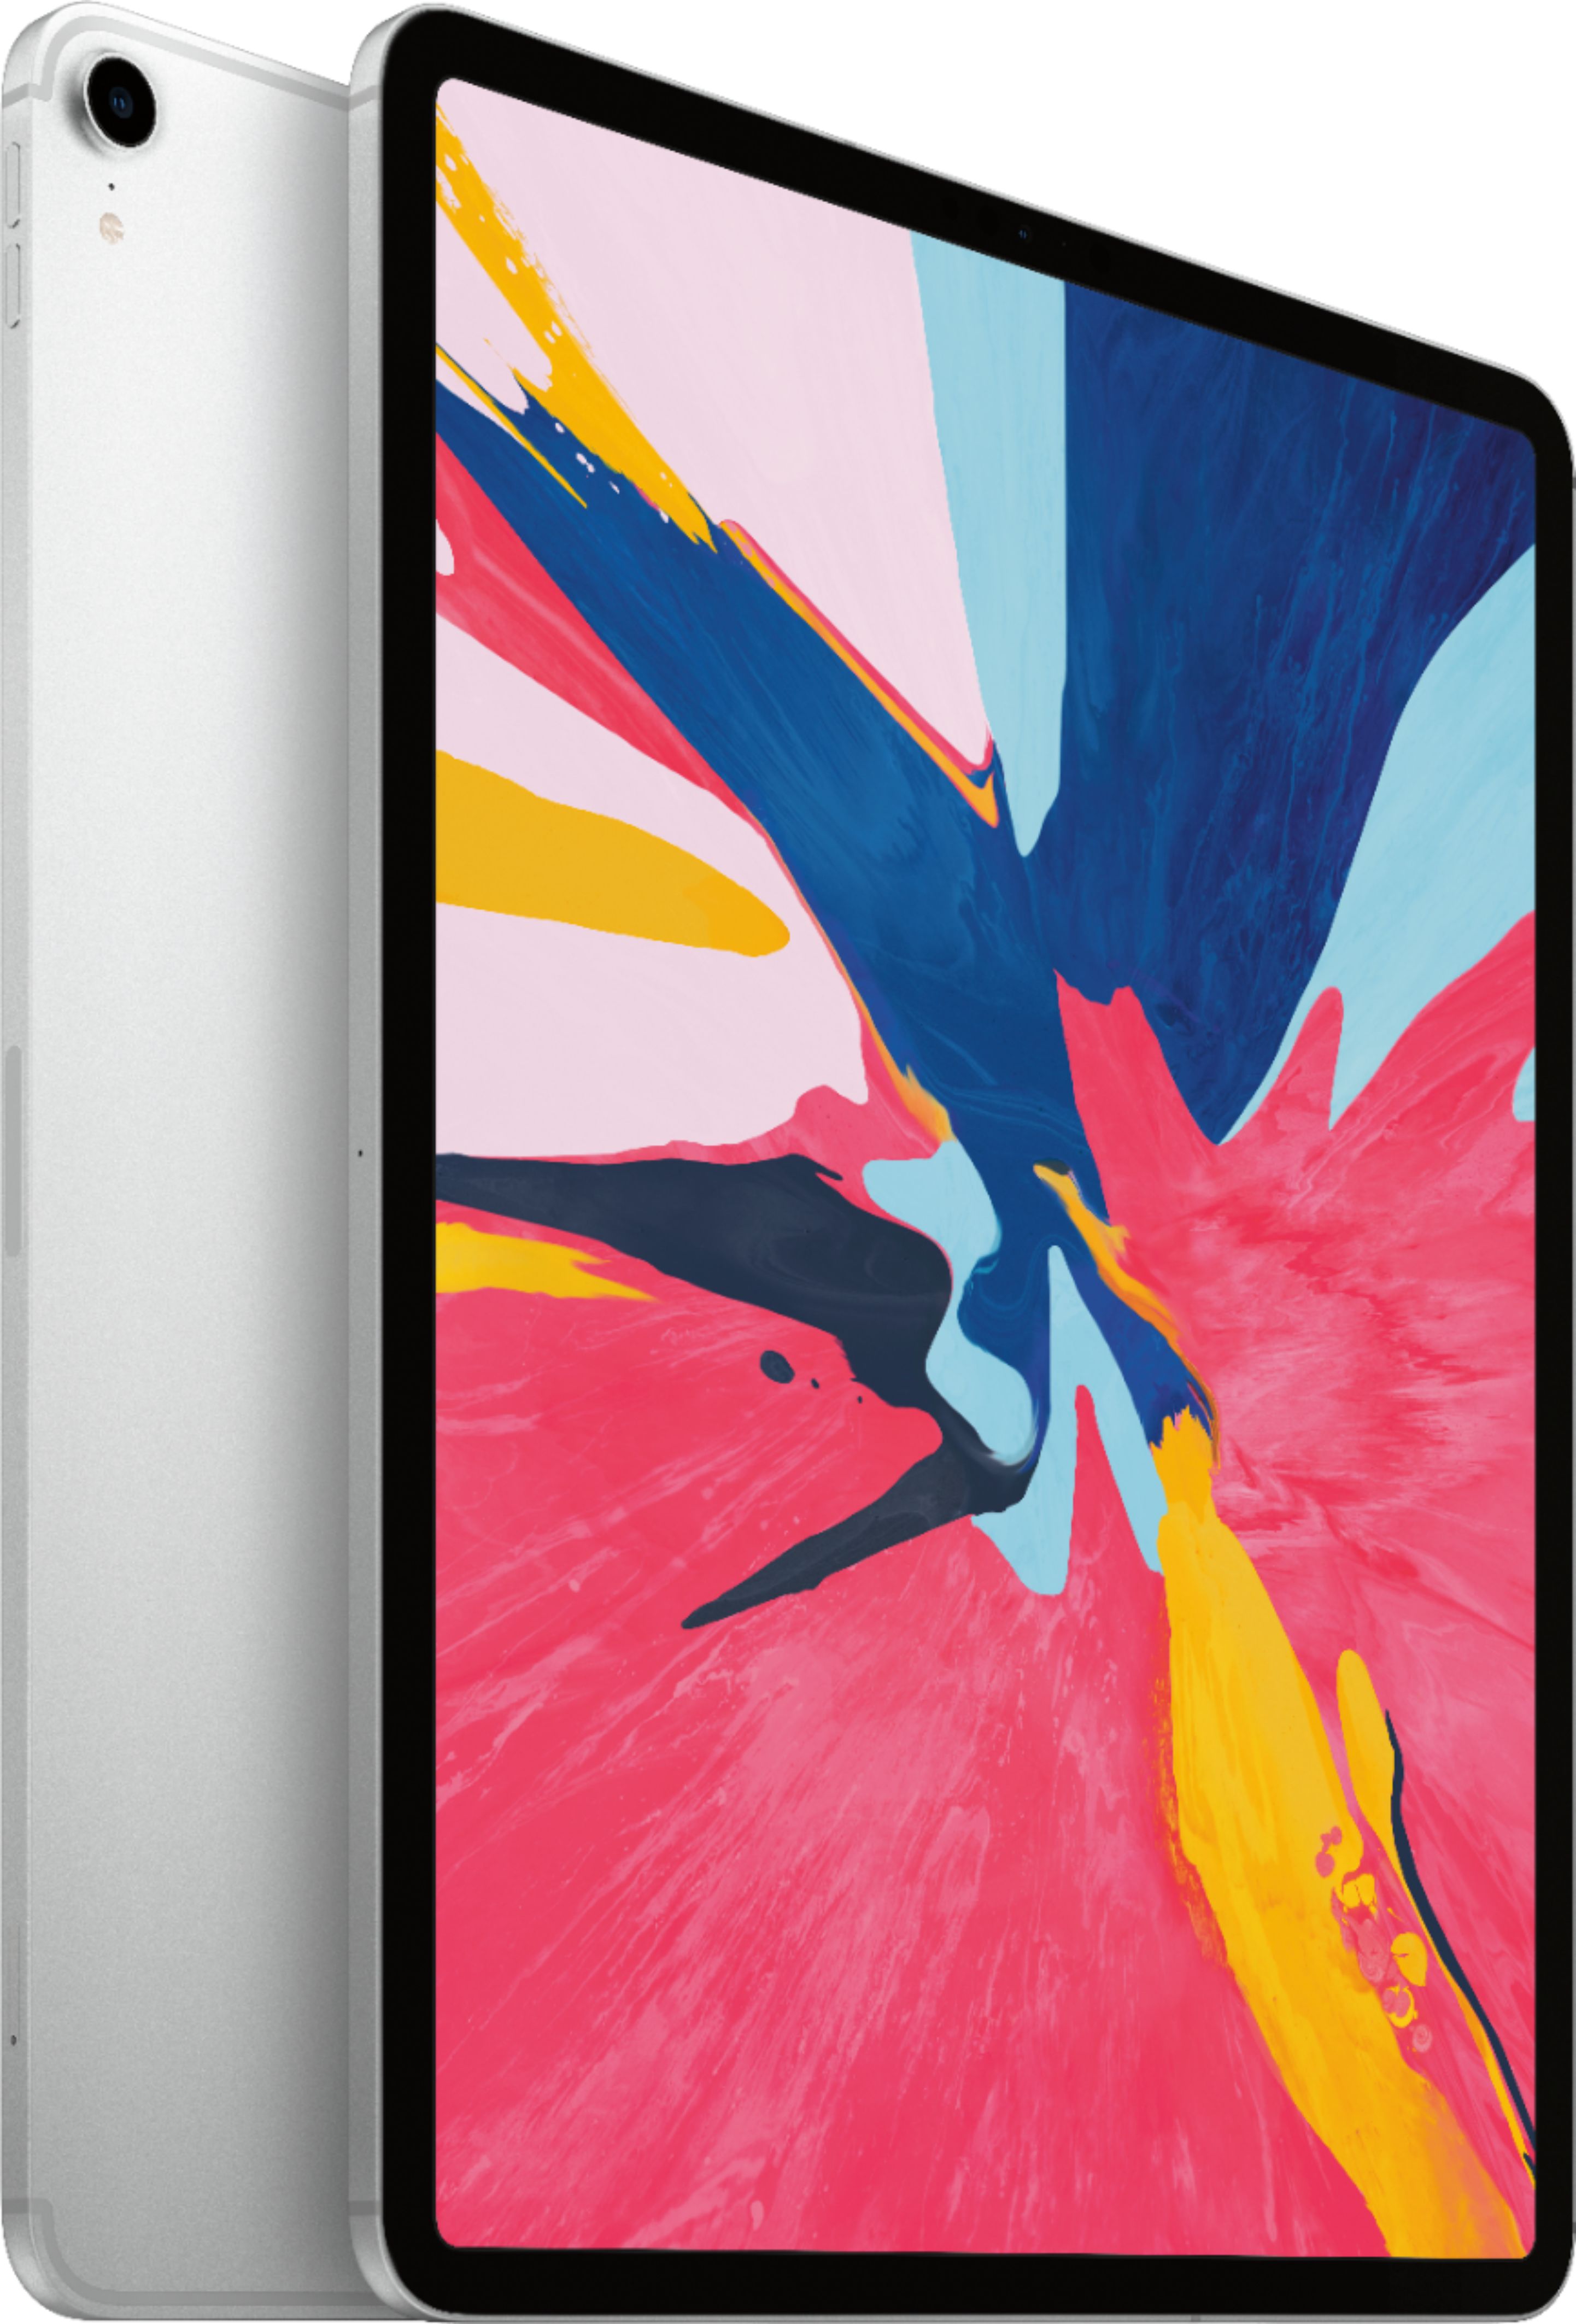 Angle View: Apple - 12.9-Inch iPad Pro (3rd Generation)  with Wi-Fi + Cellular - 64GB - Silver (Unlocked)